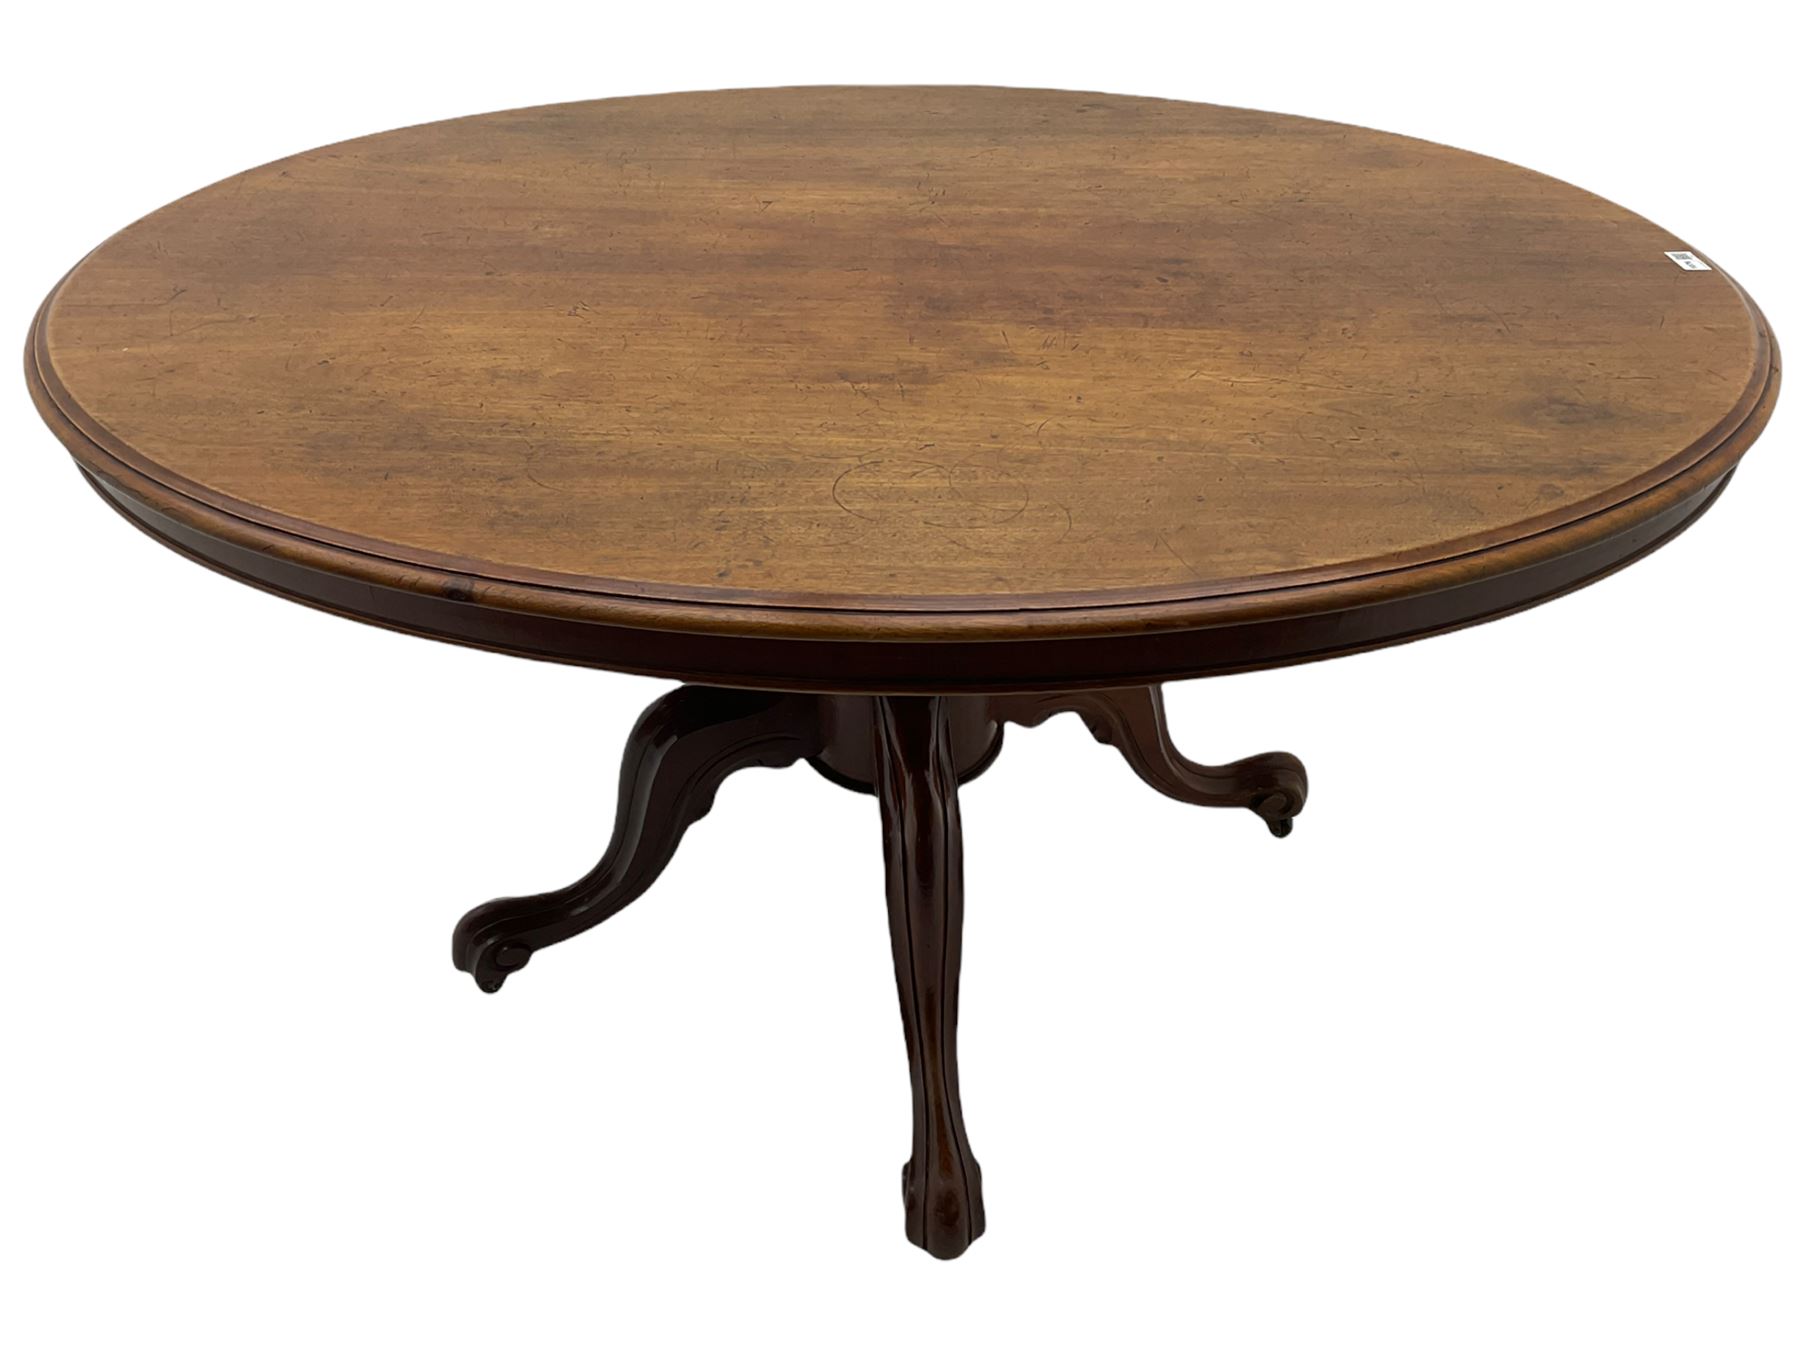 Victorian oval loo centre table - Image 2 of 5